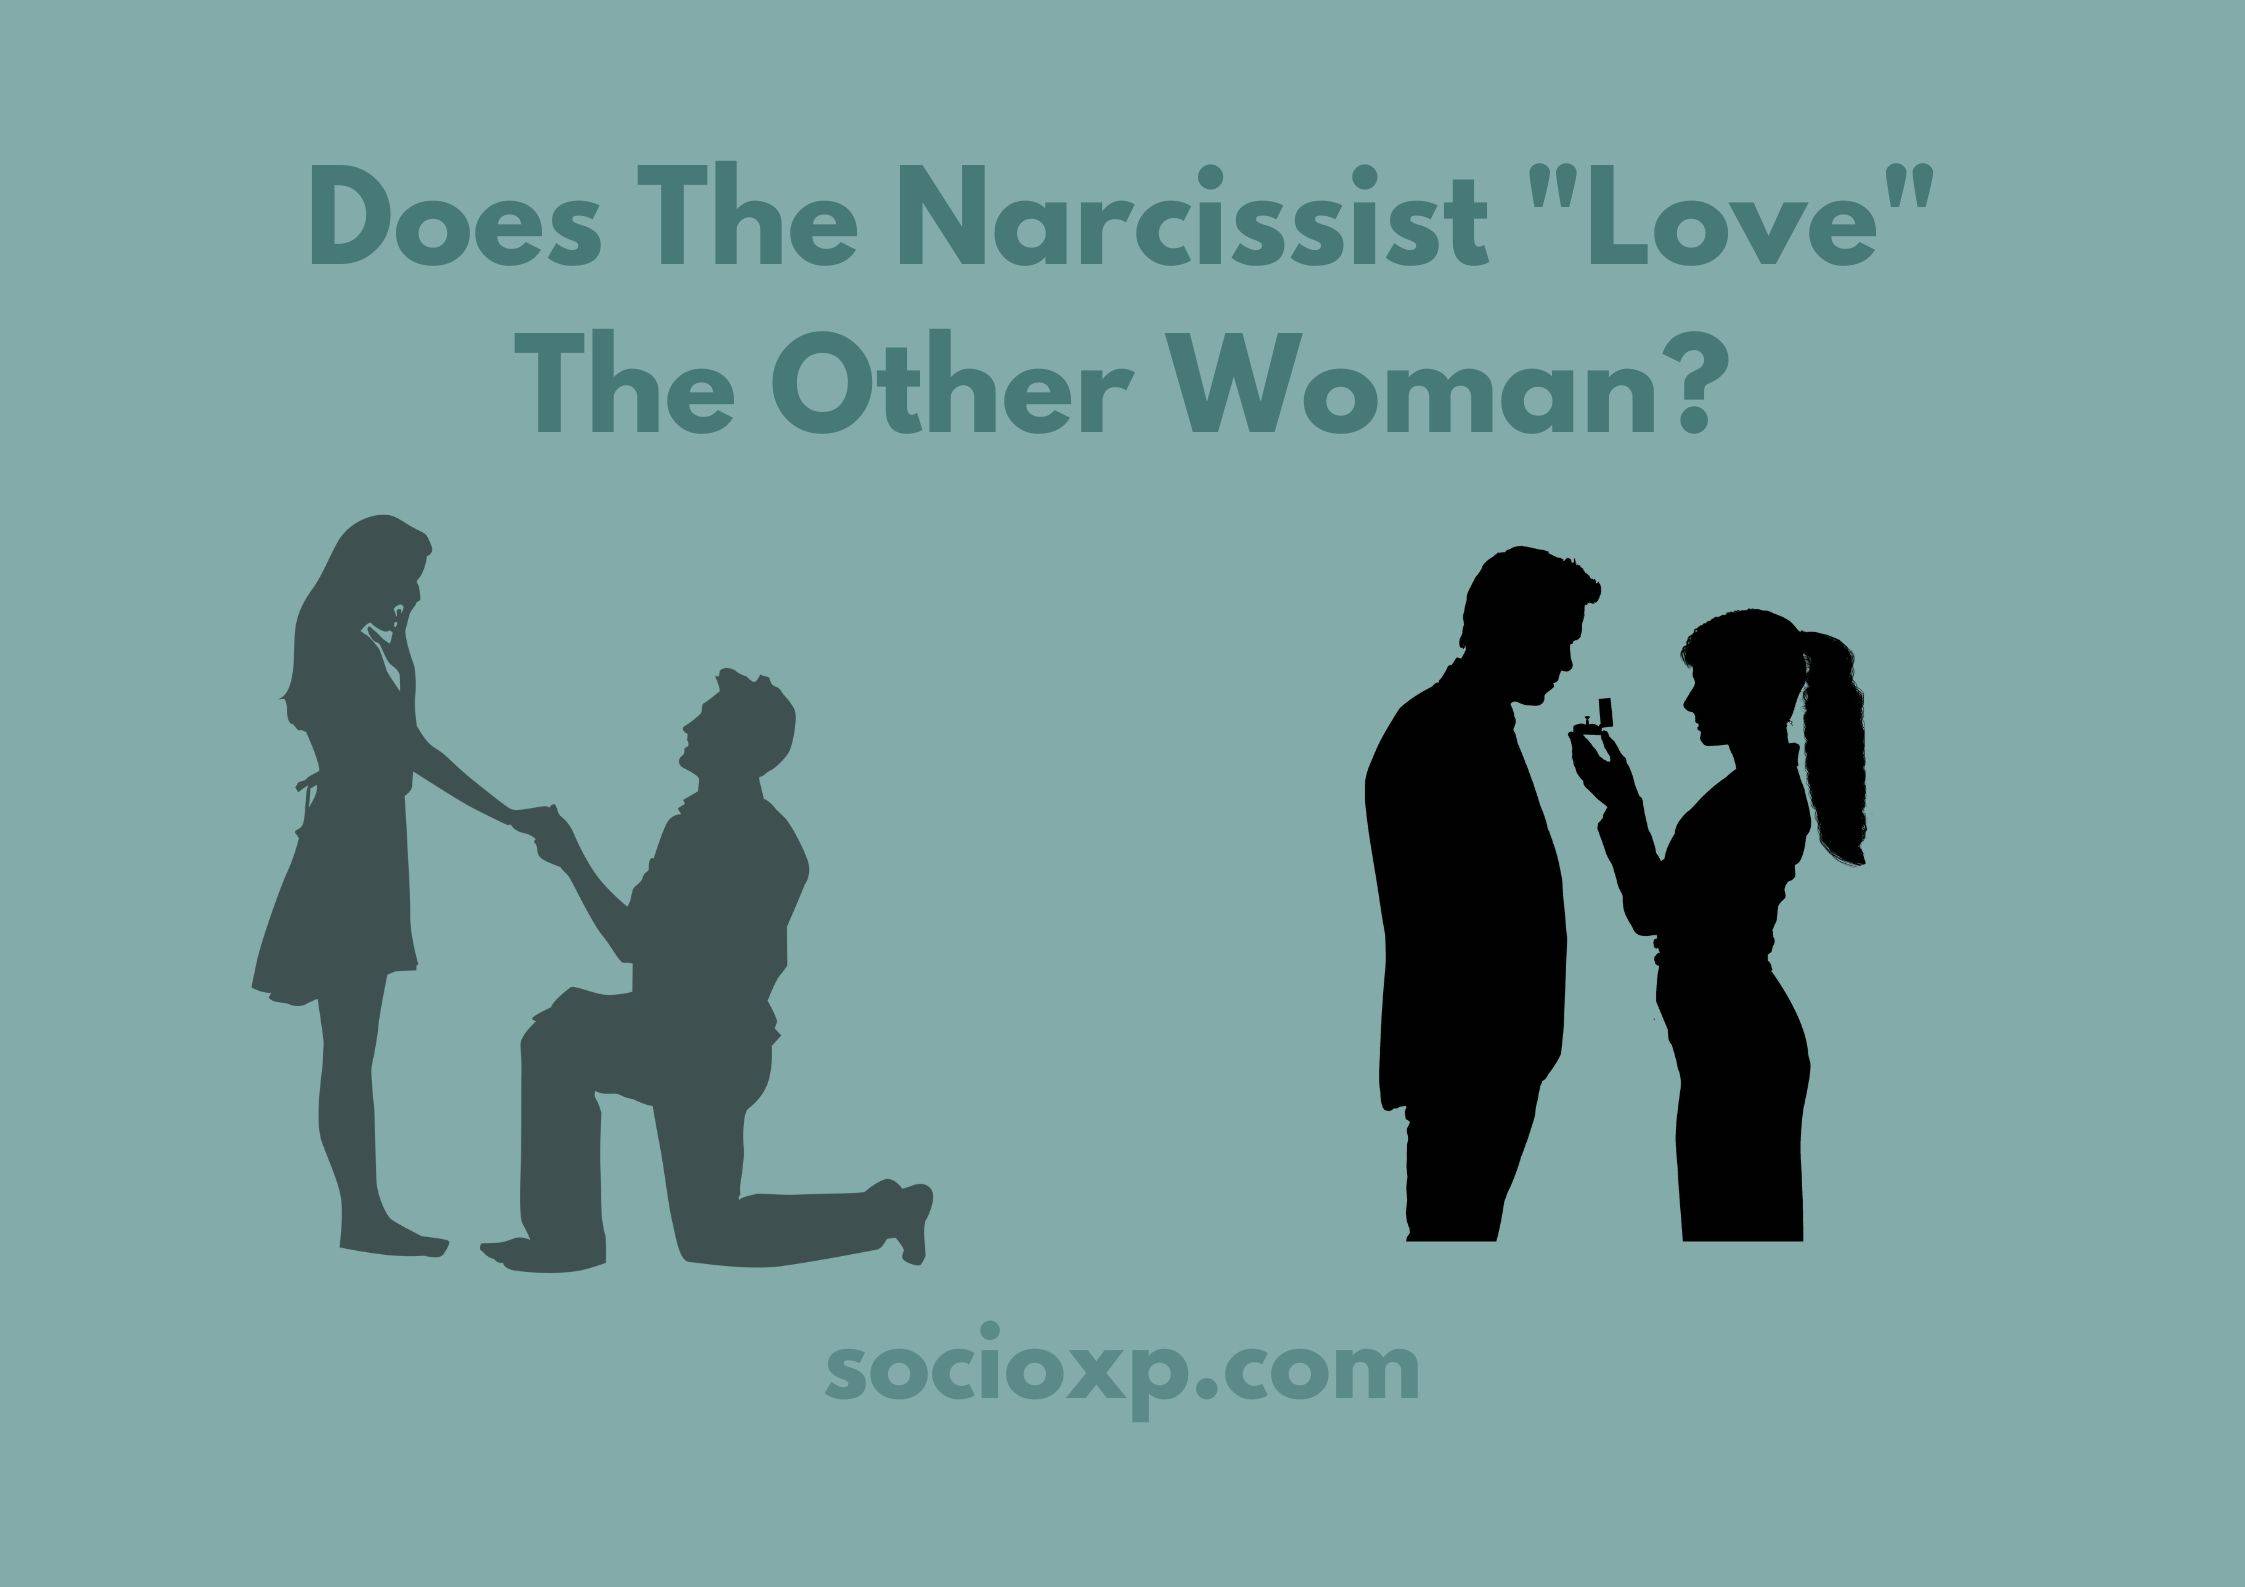 Does The Narcissist Love The Other Woman?